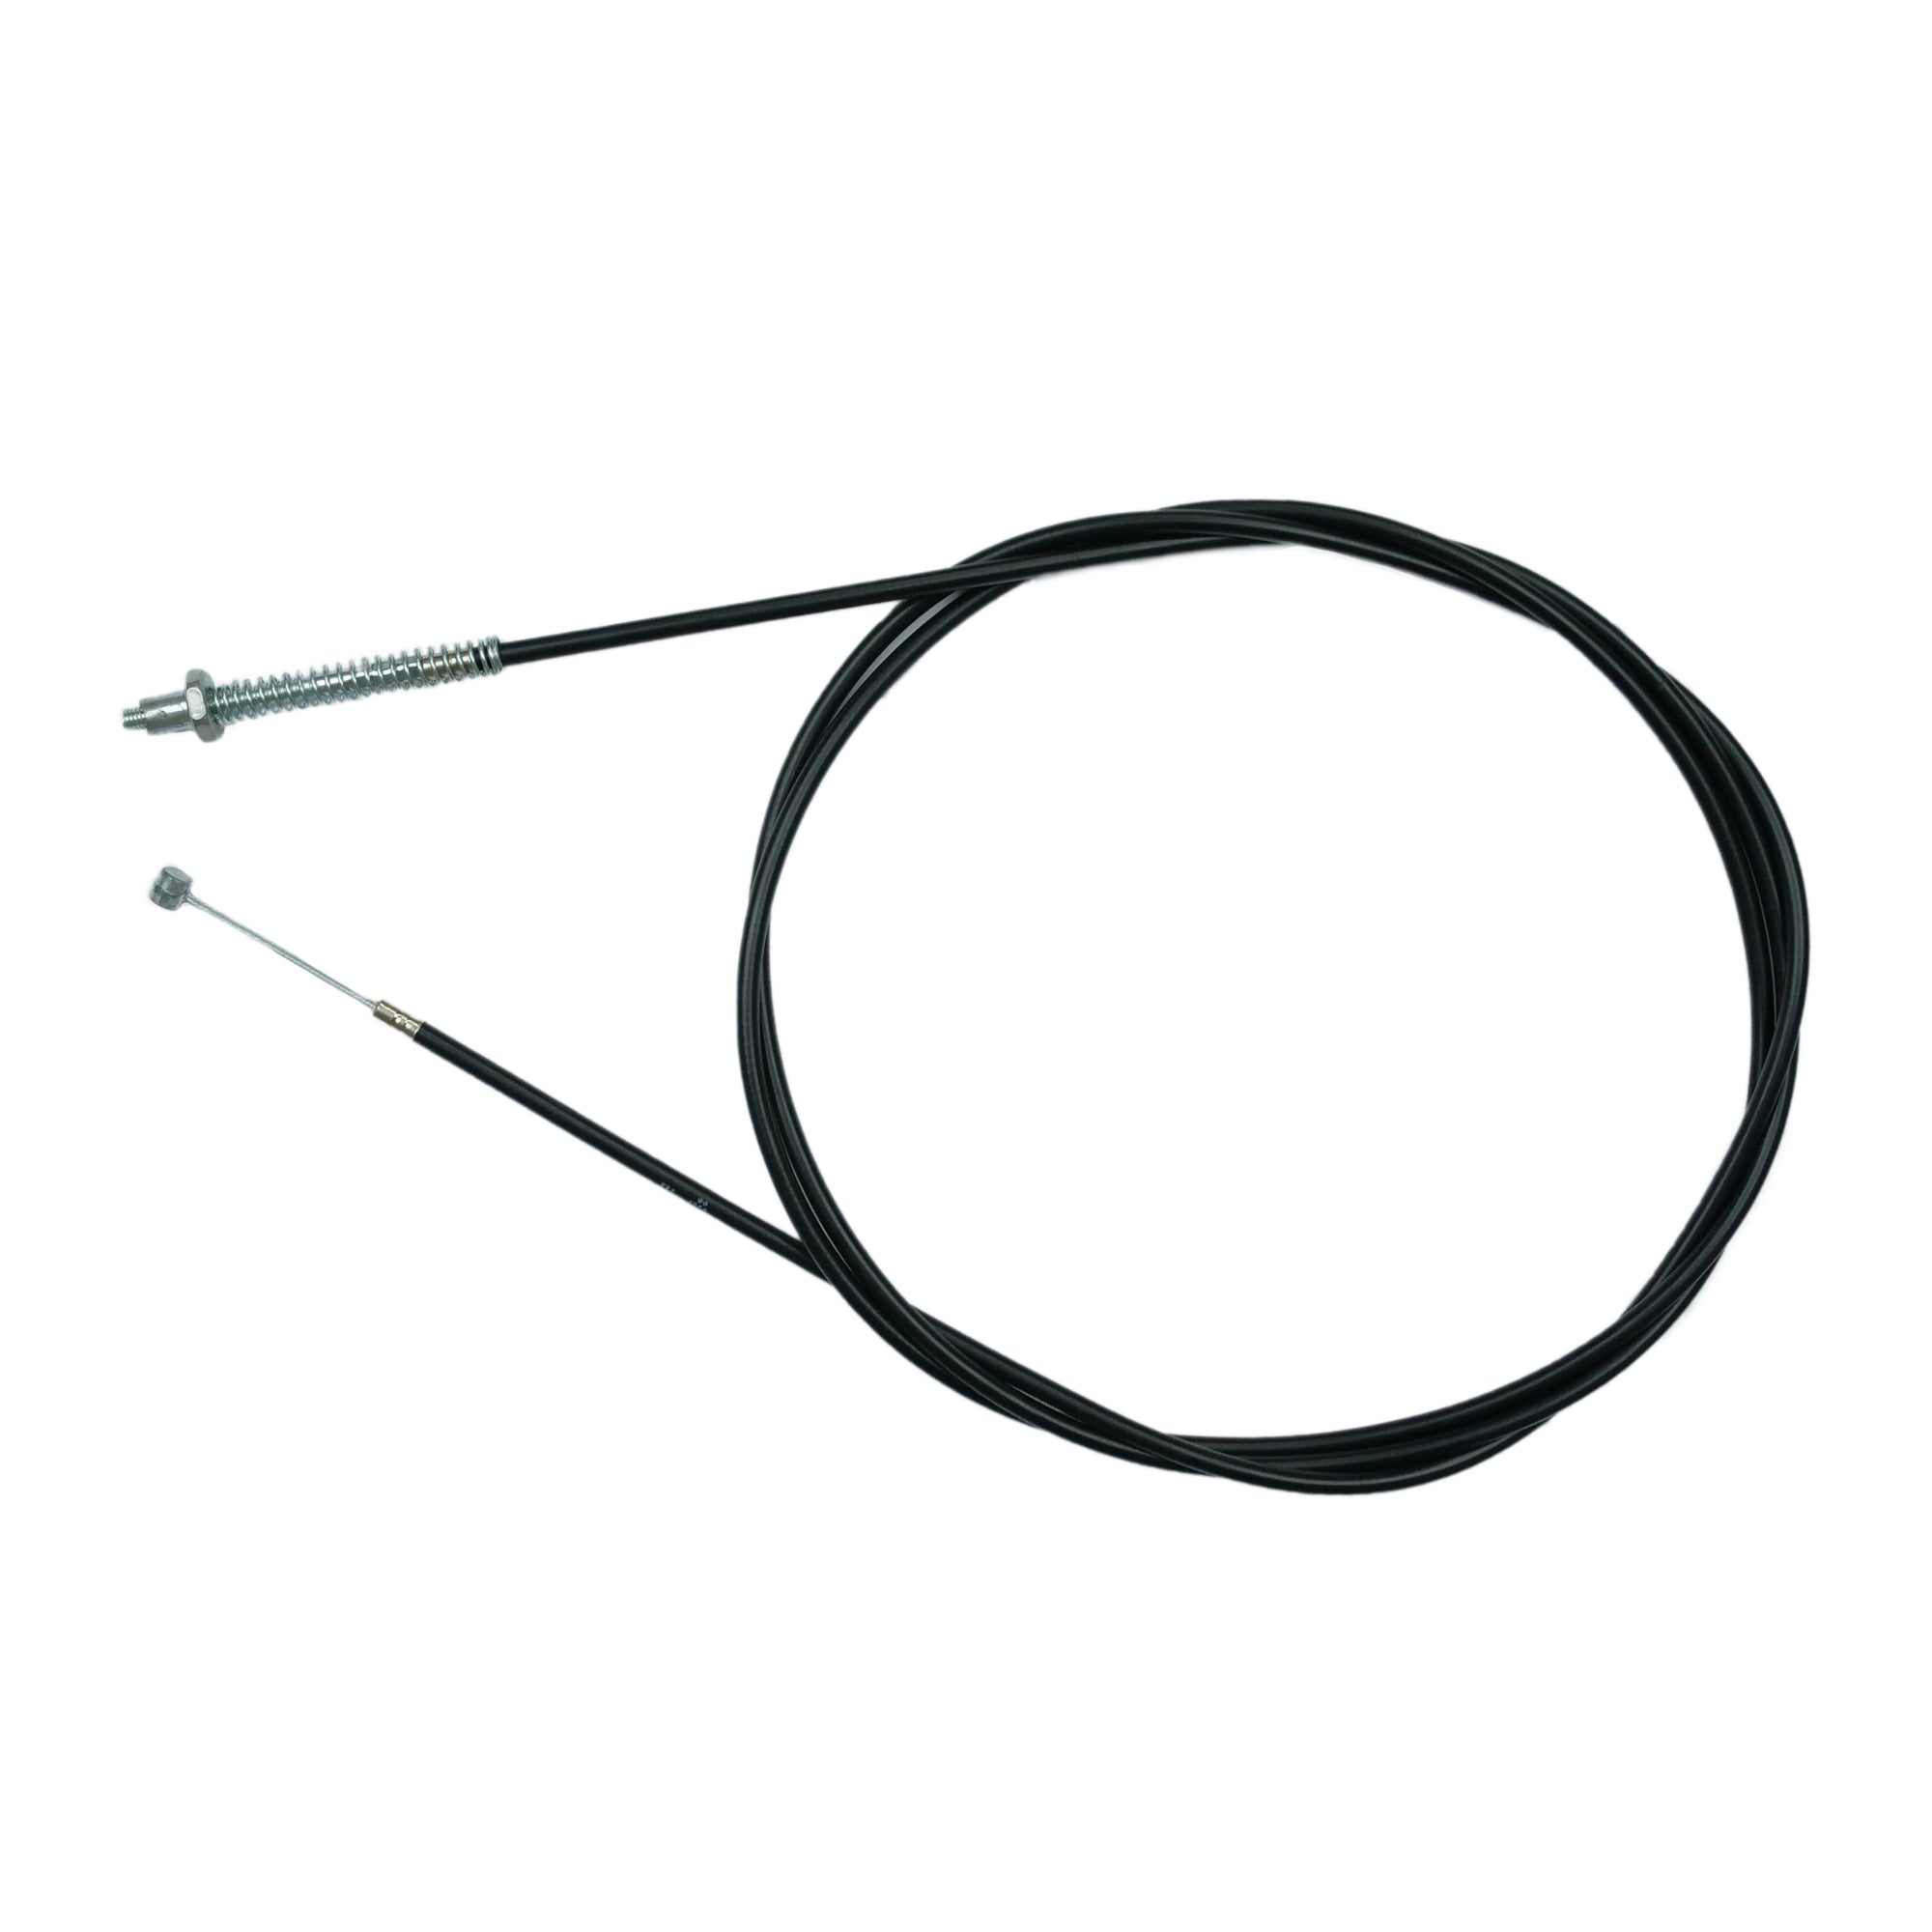 Brake Cable for the EMOVE Touring